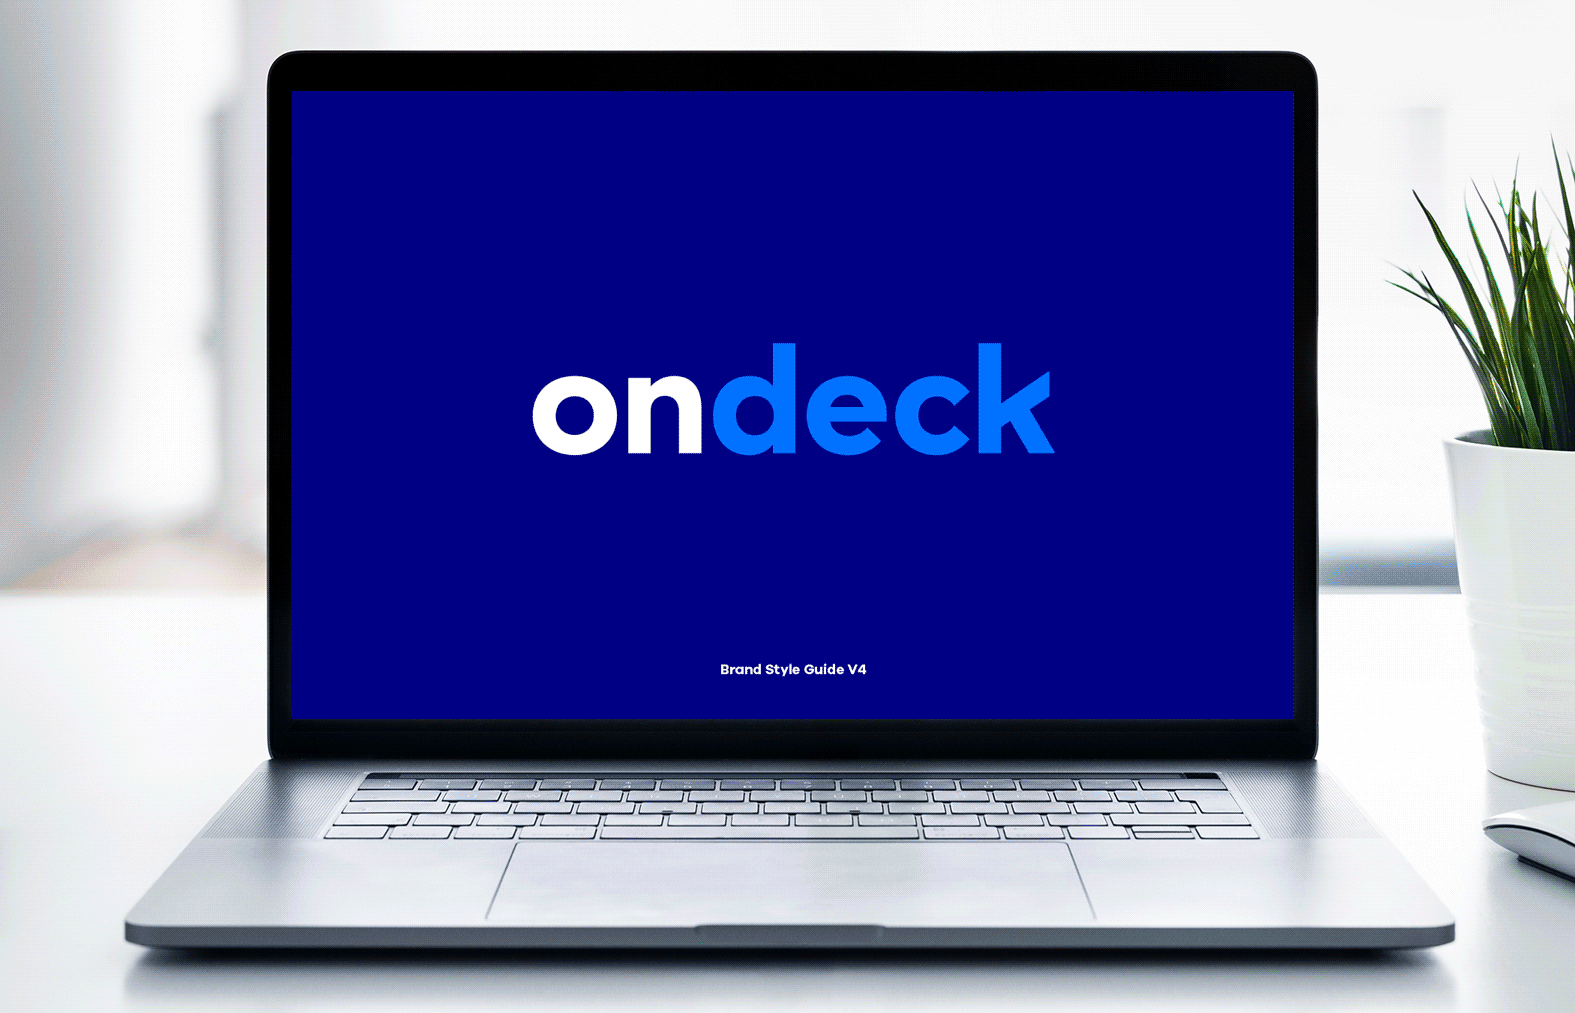 A slideshow of pages from the OnDeck brand guidelines shown on a laptop computer, including editorial and visual elements.